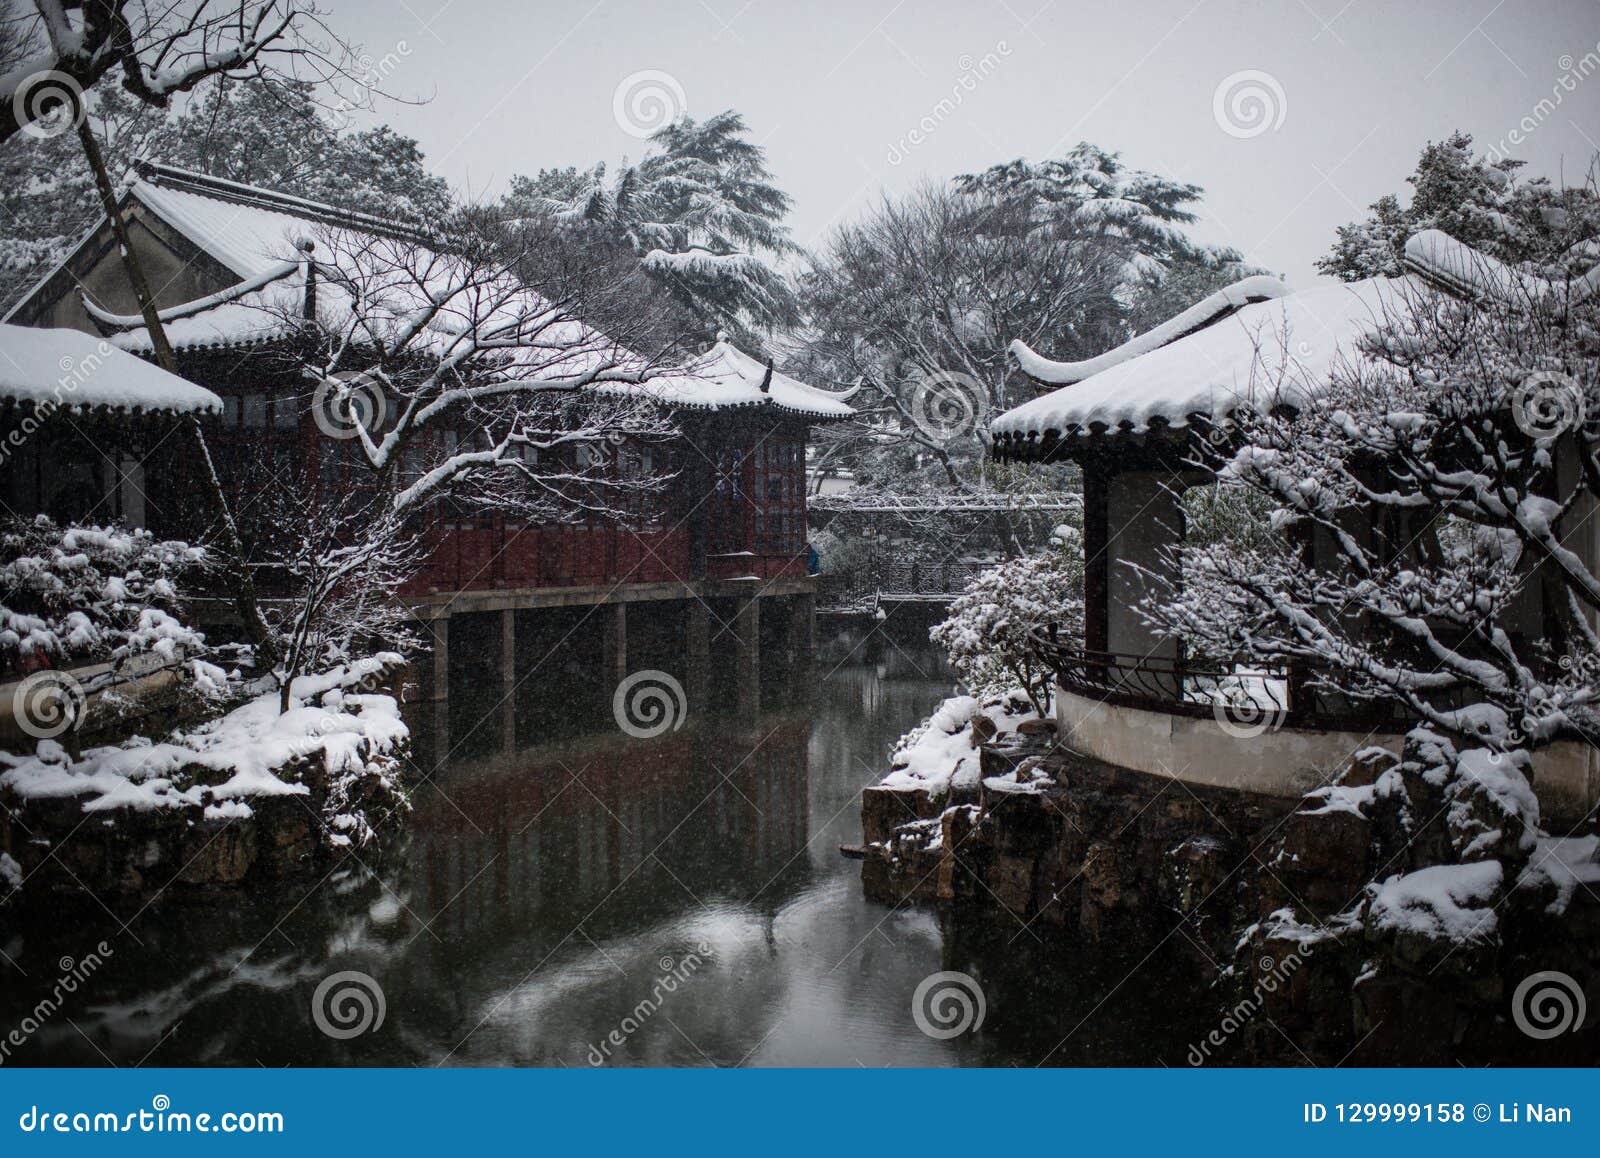 humble administrator`s garden in snow, ancient suzhou, china